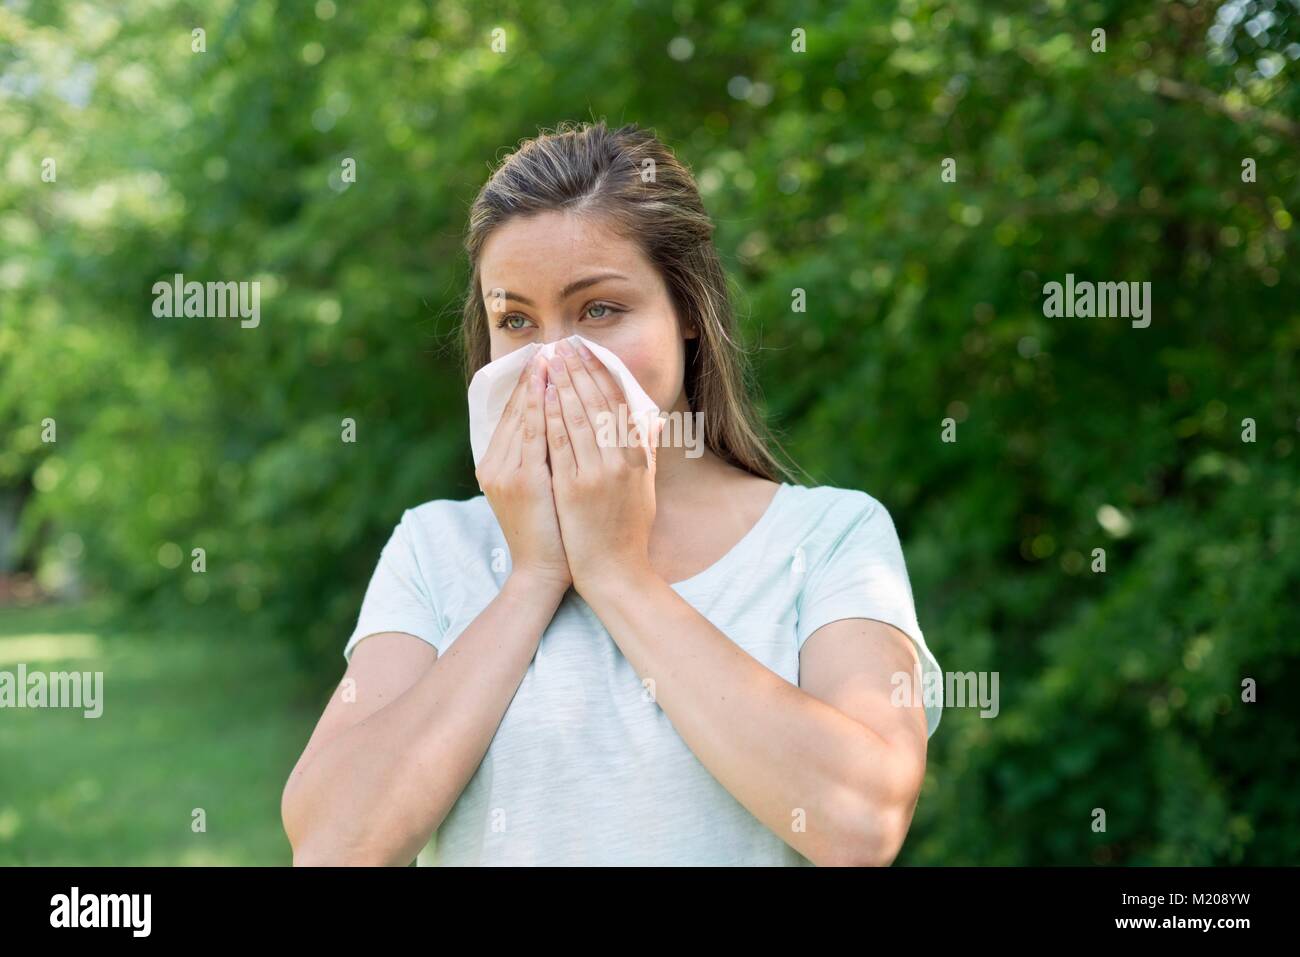 Young woman blowing her nose on a tissue. Stock Photo